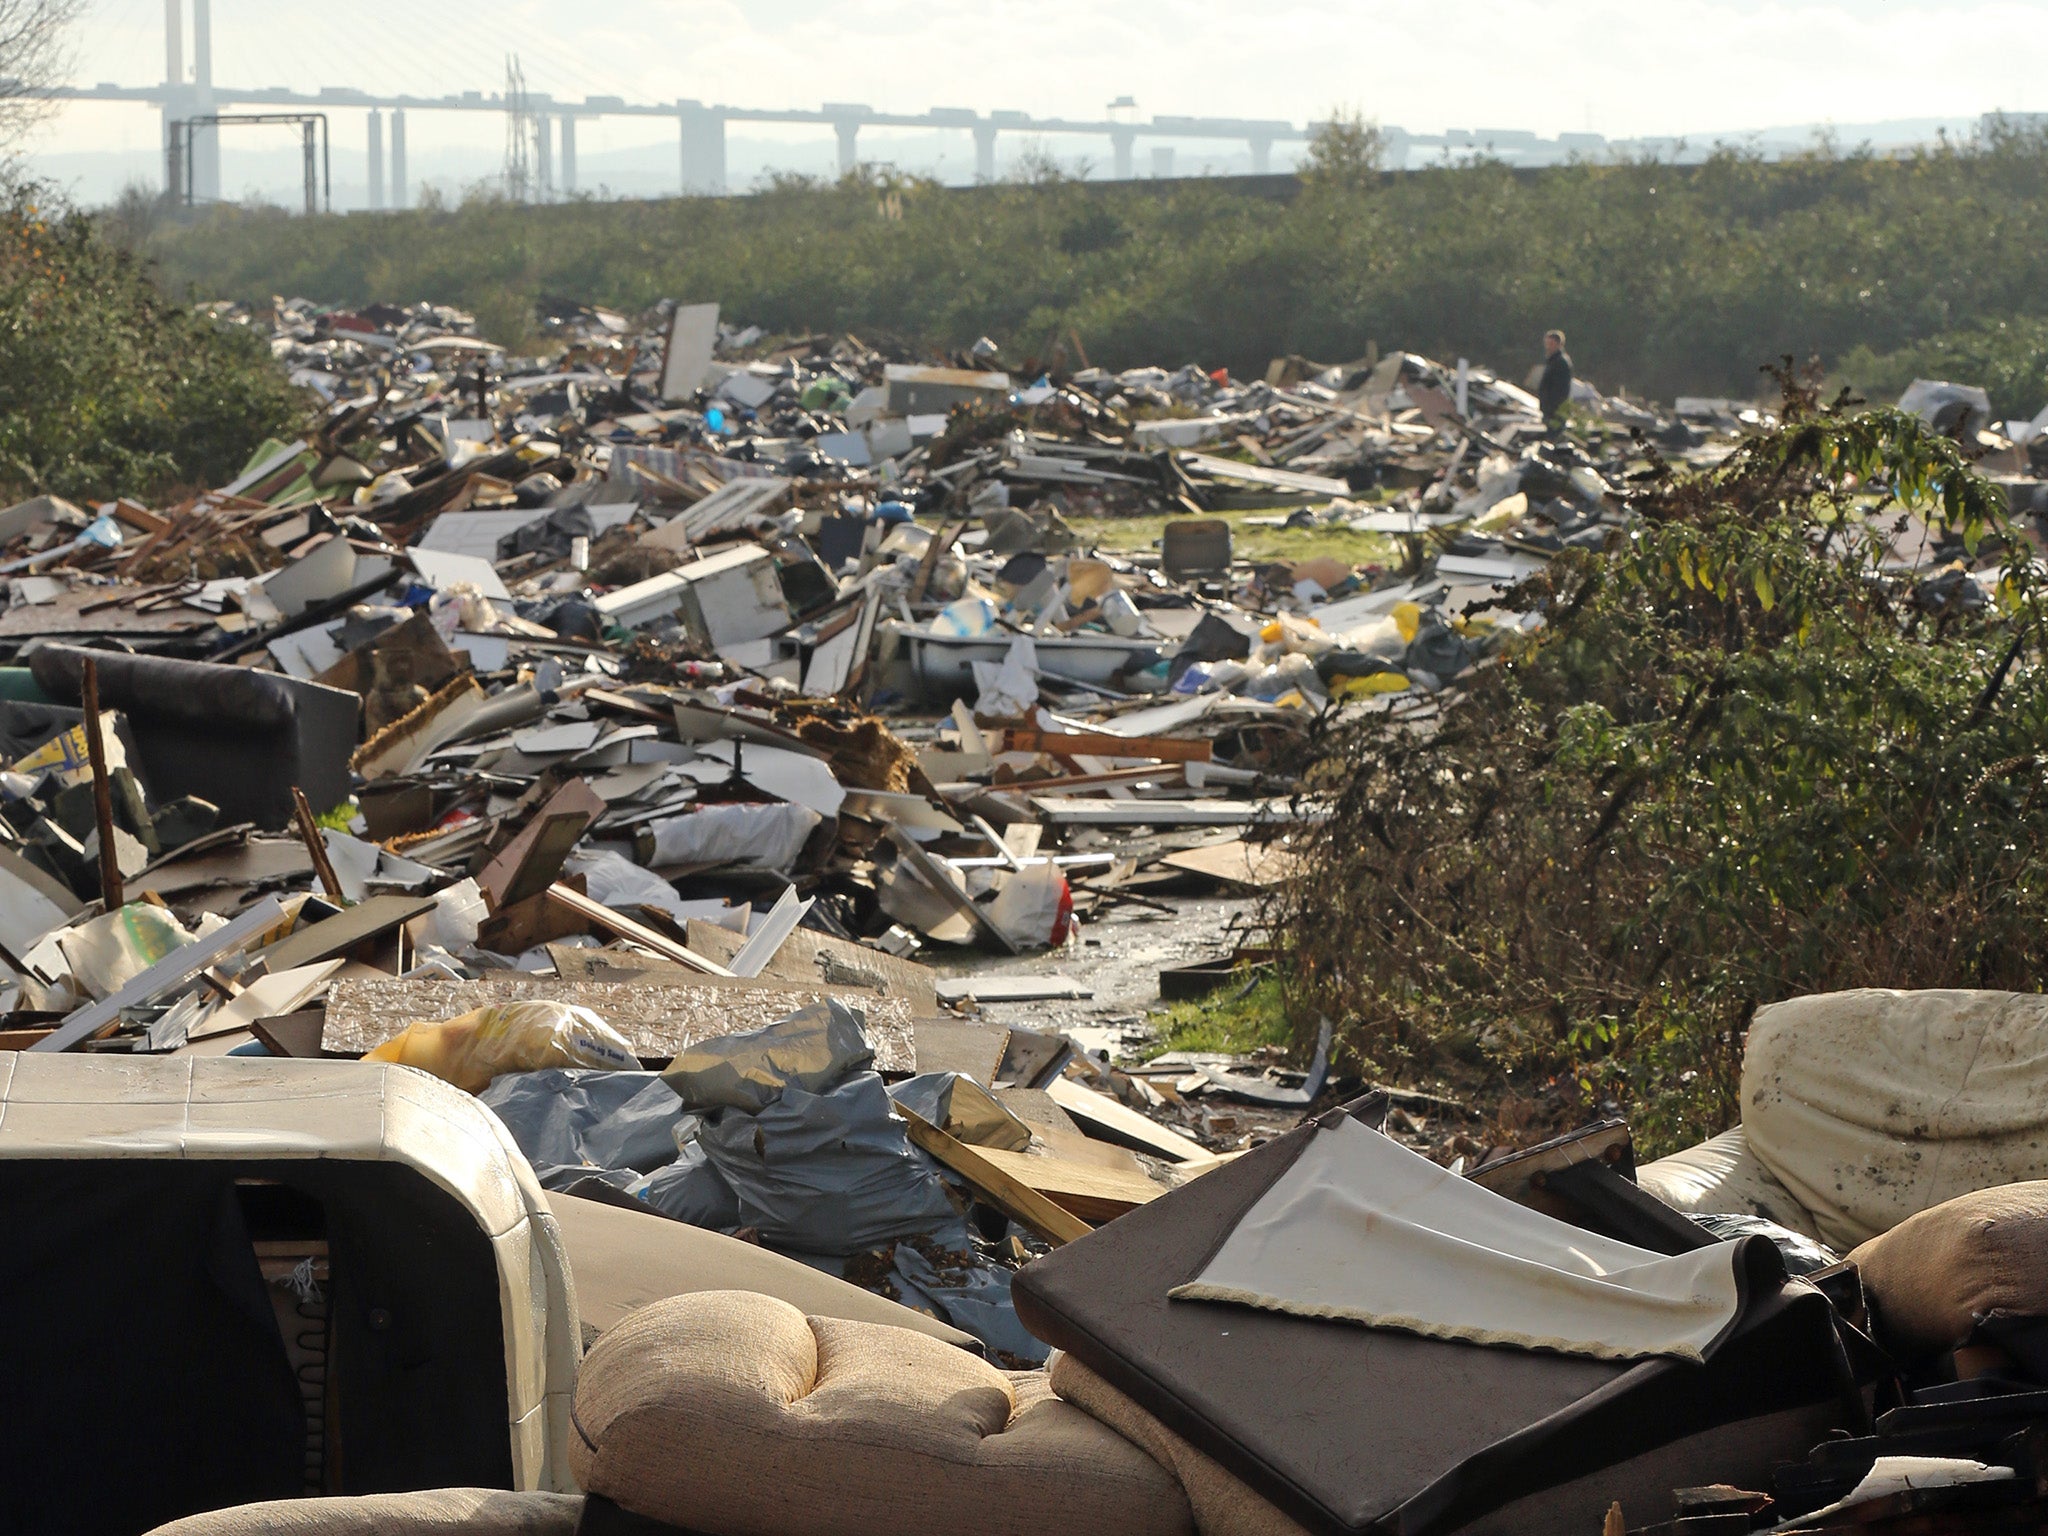 Waste crime costs the UK hundreds of millions per year